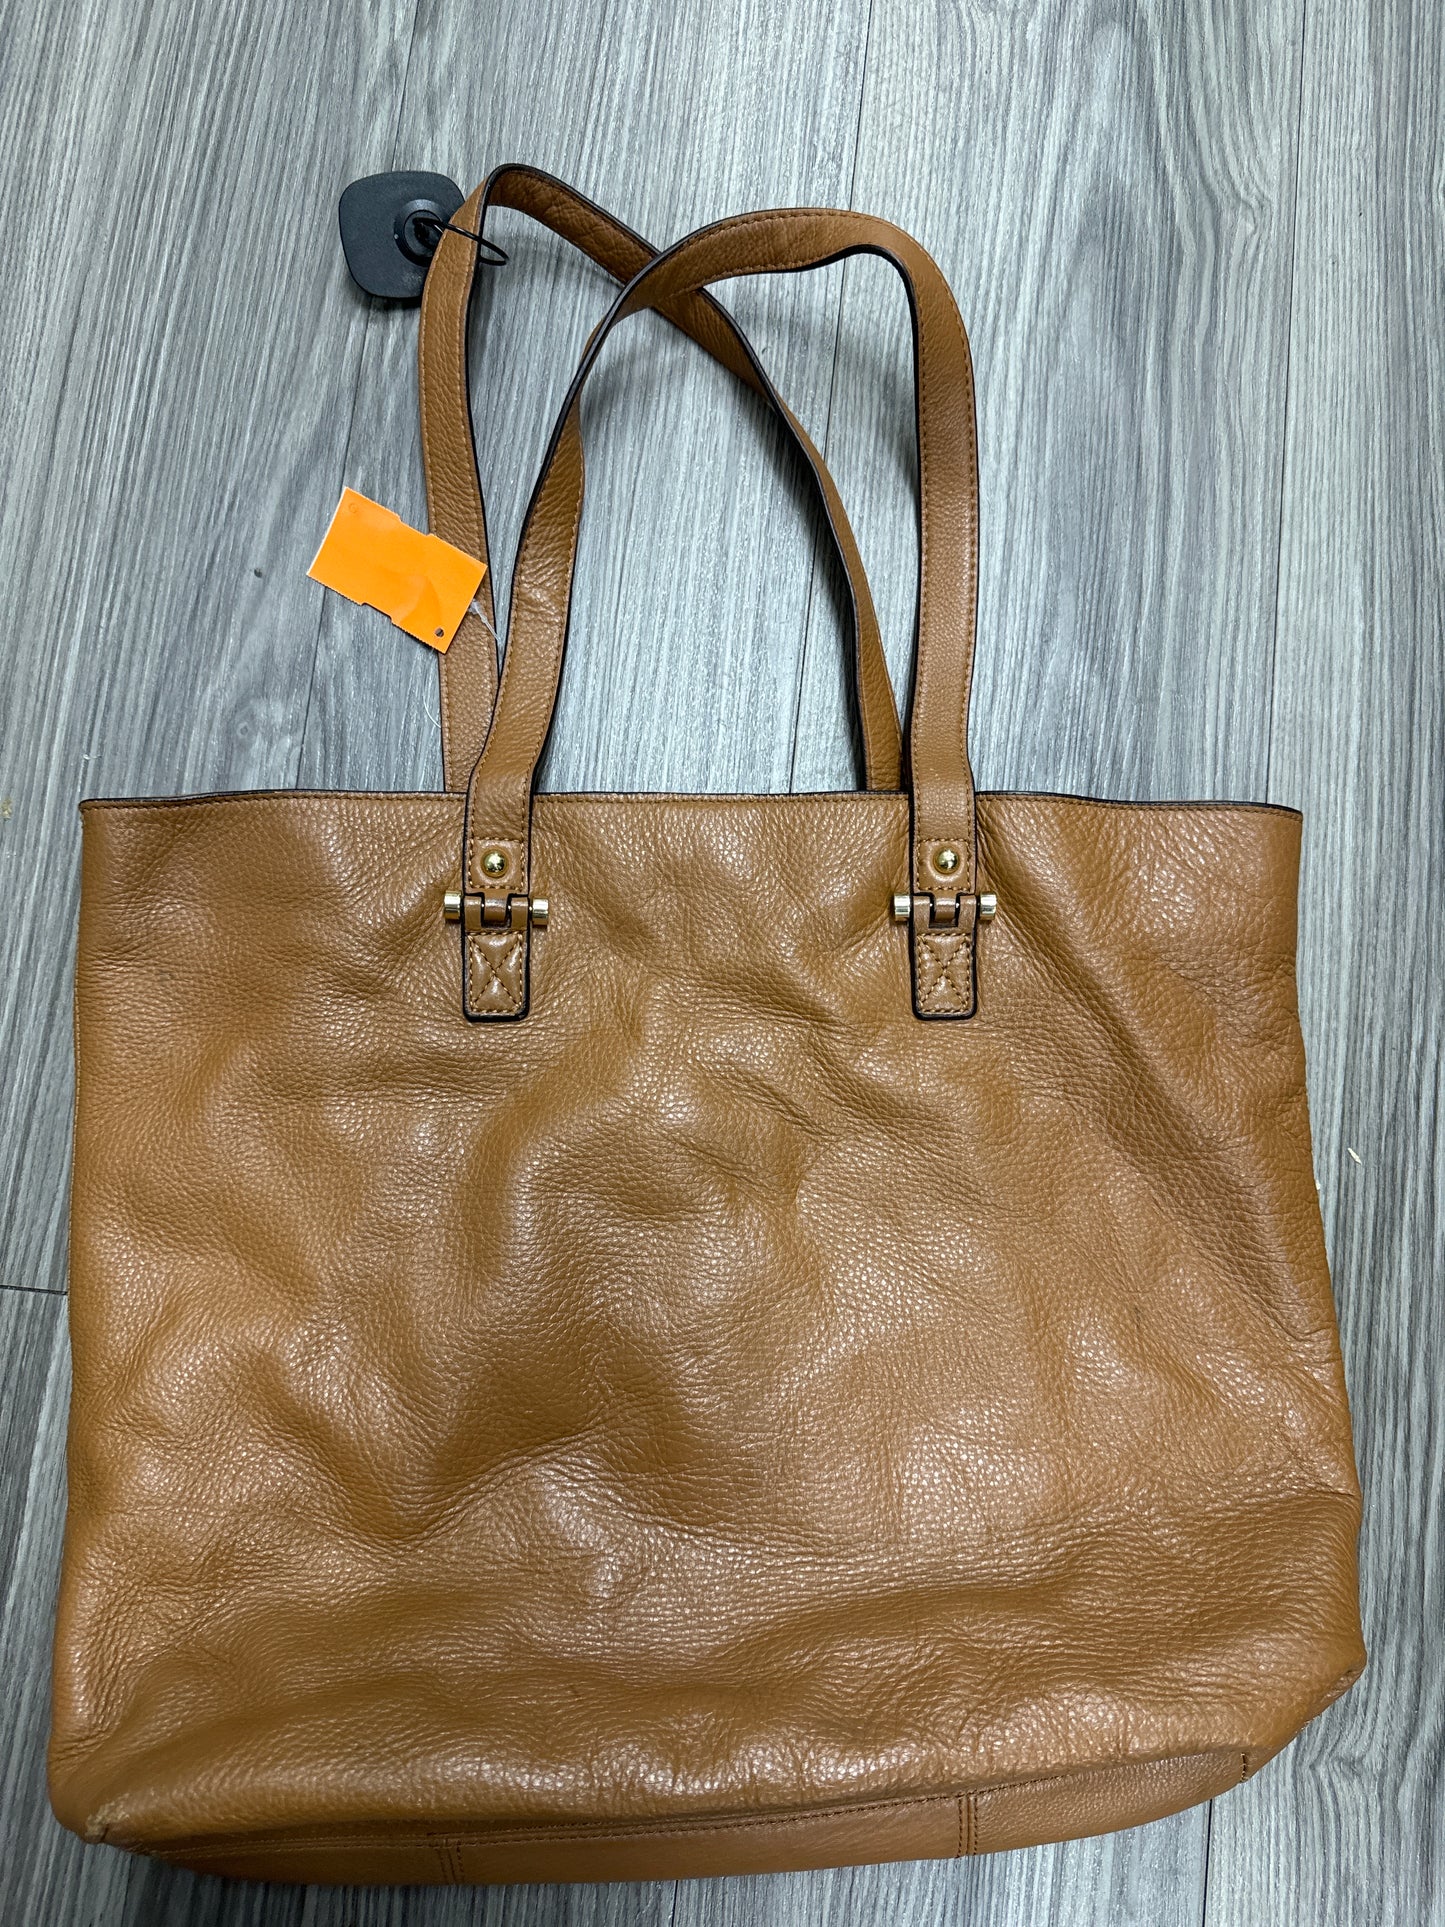 Handbag Leather By Vince Camuto  Size: Large